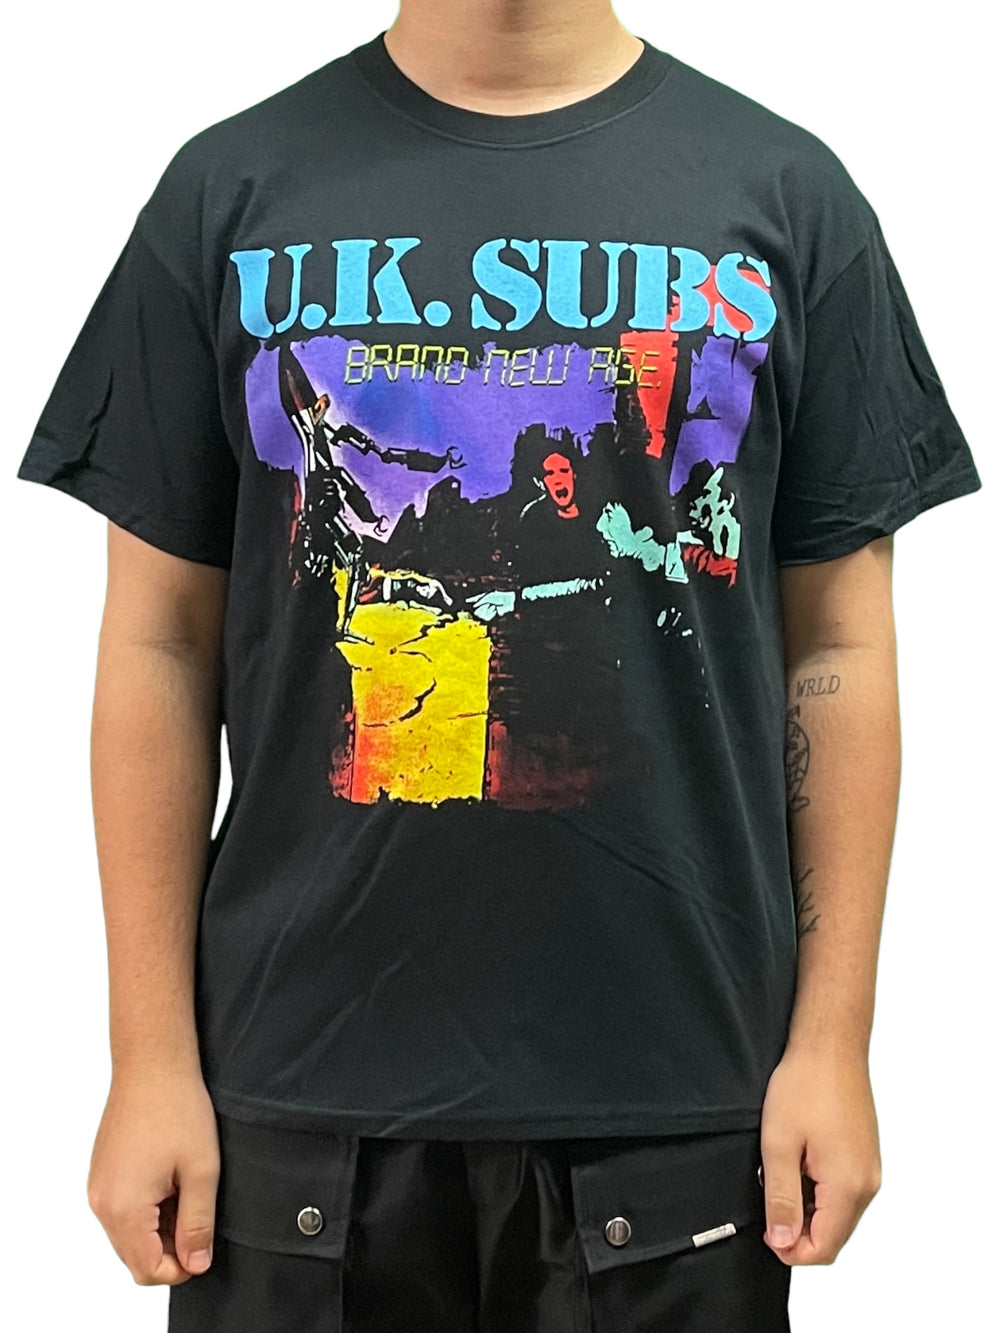 UK Subs Brand New Age Unisex Official T Shirt Brand New Various Sizes